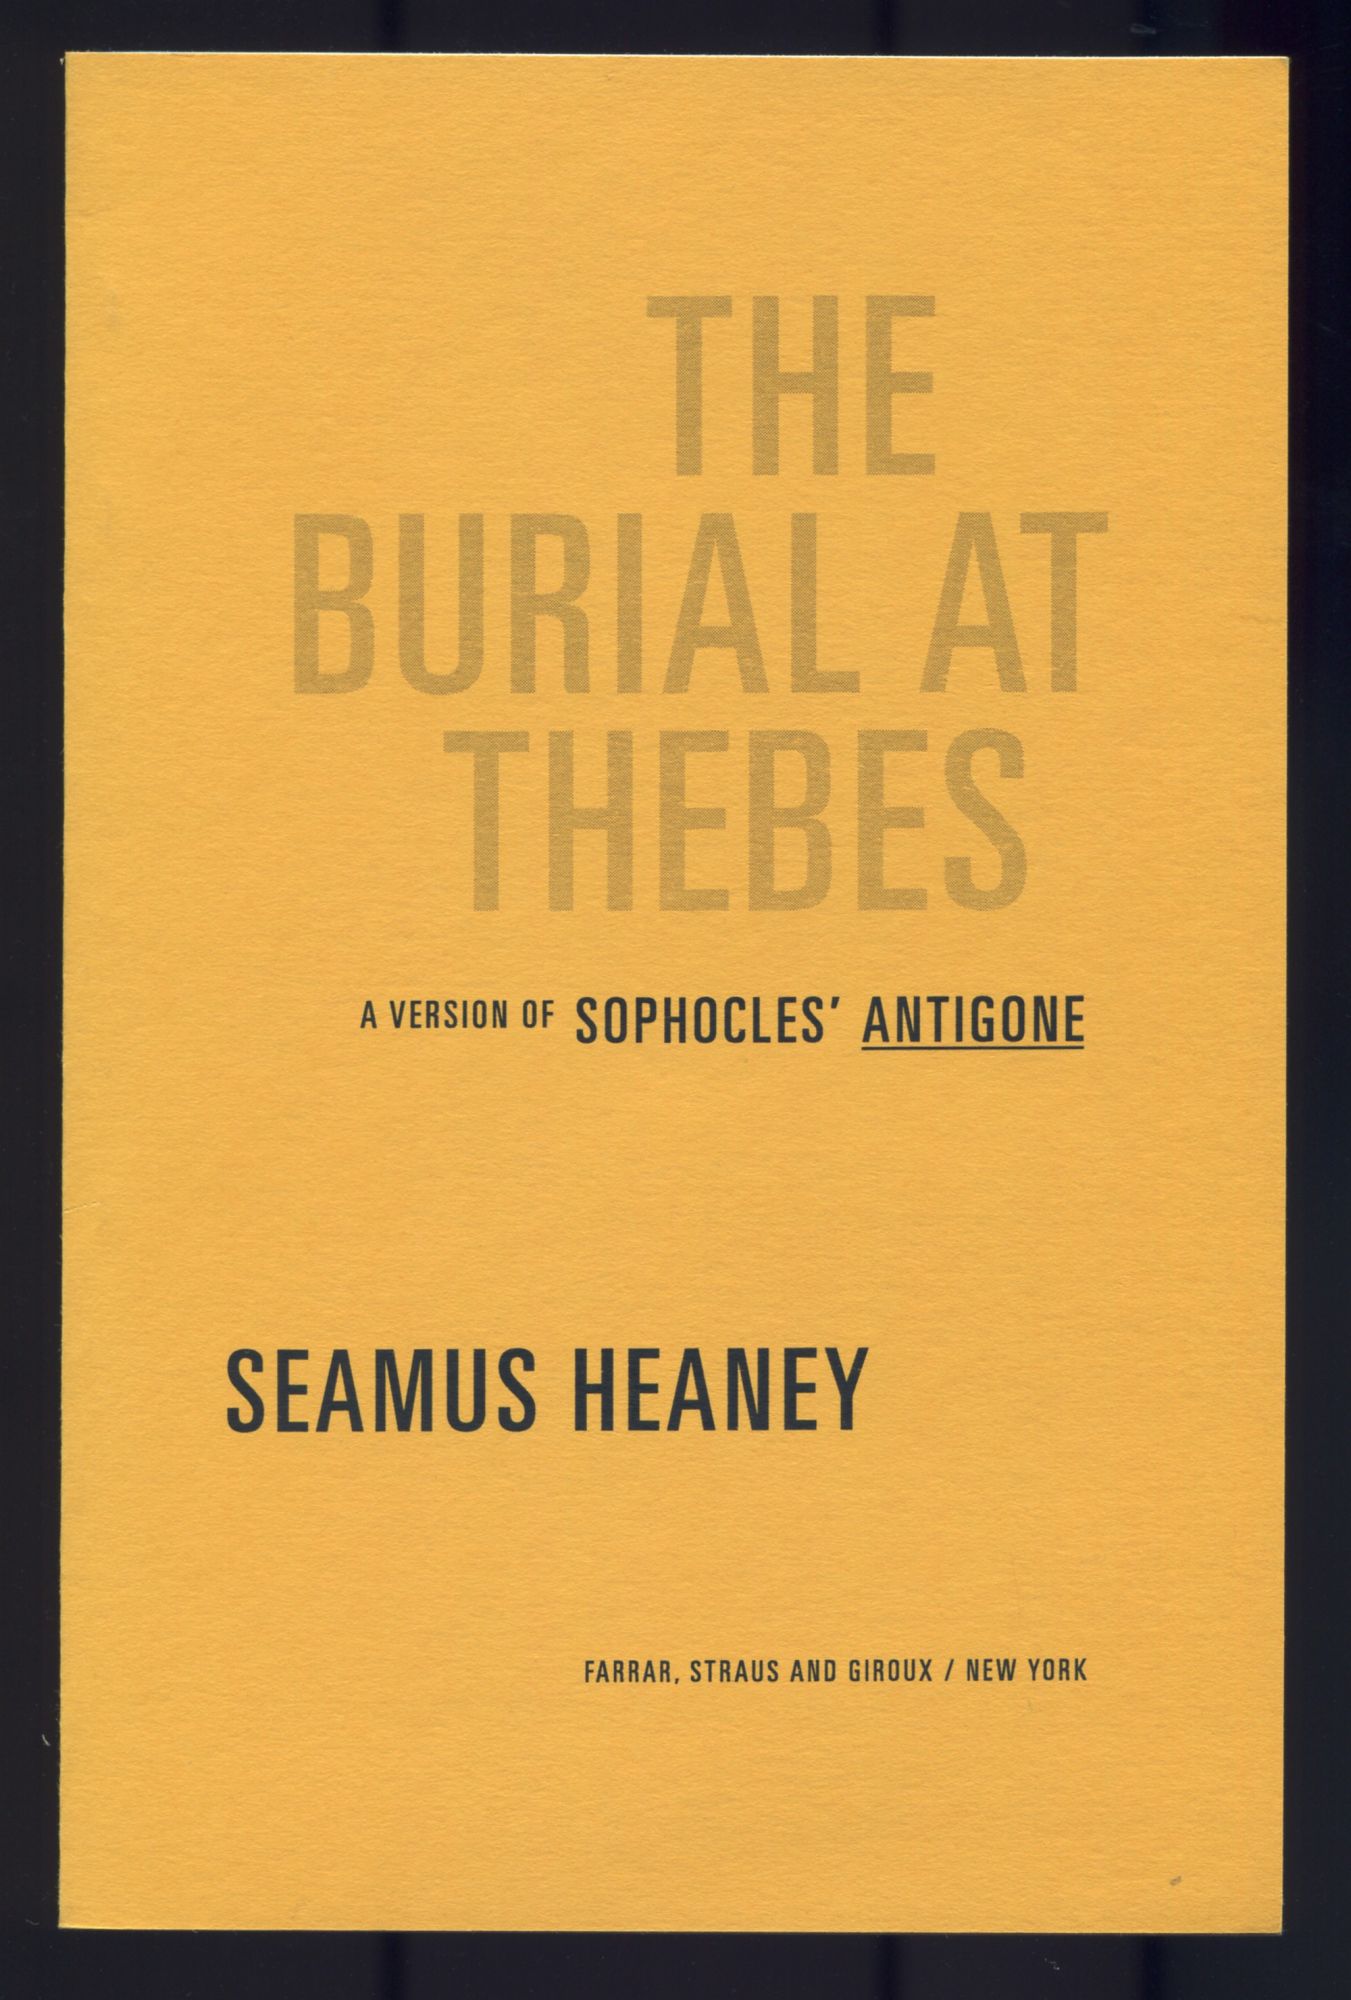 The Burial at Thebes. Sophocles' Antigone by SOPHOCLES, Seamus Heaney ...